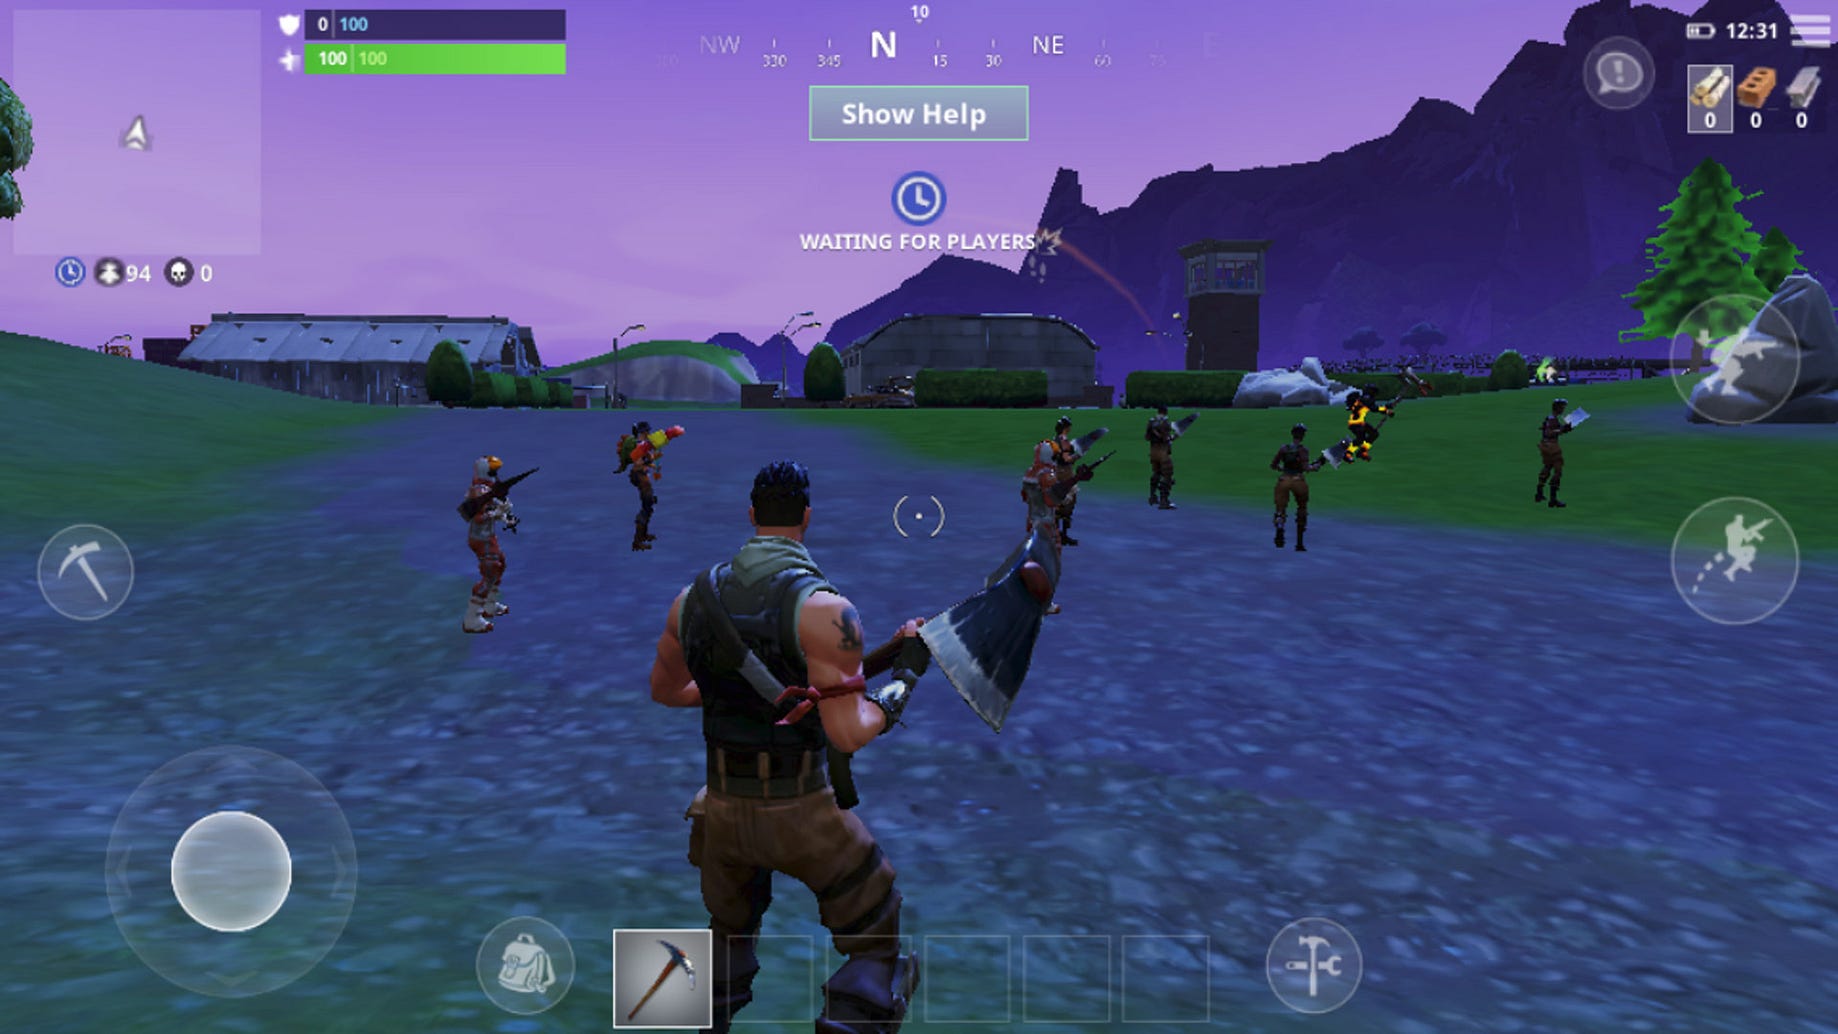 Fortnite Battle Royale Cheat Codes For Ps4 Free Download Online For Mobile Ios And Android Xbox Ps4 Windows By Heathyt Medium